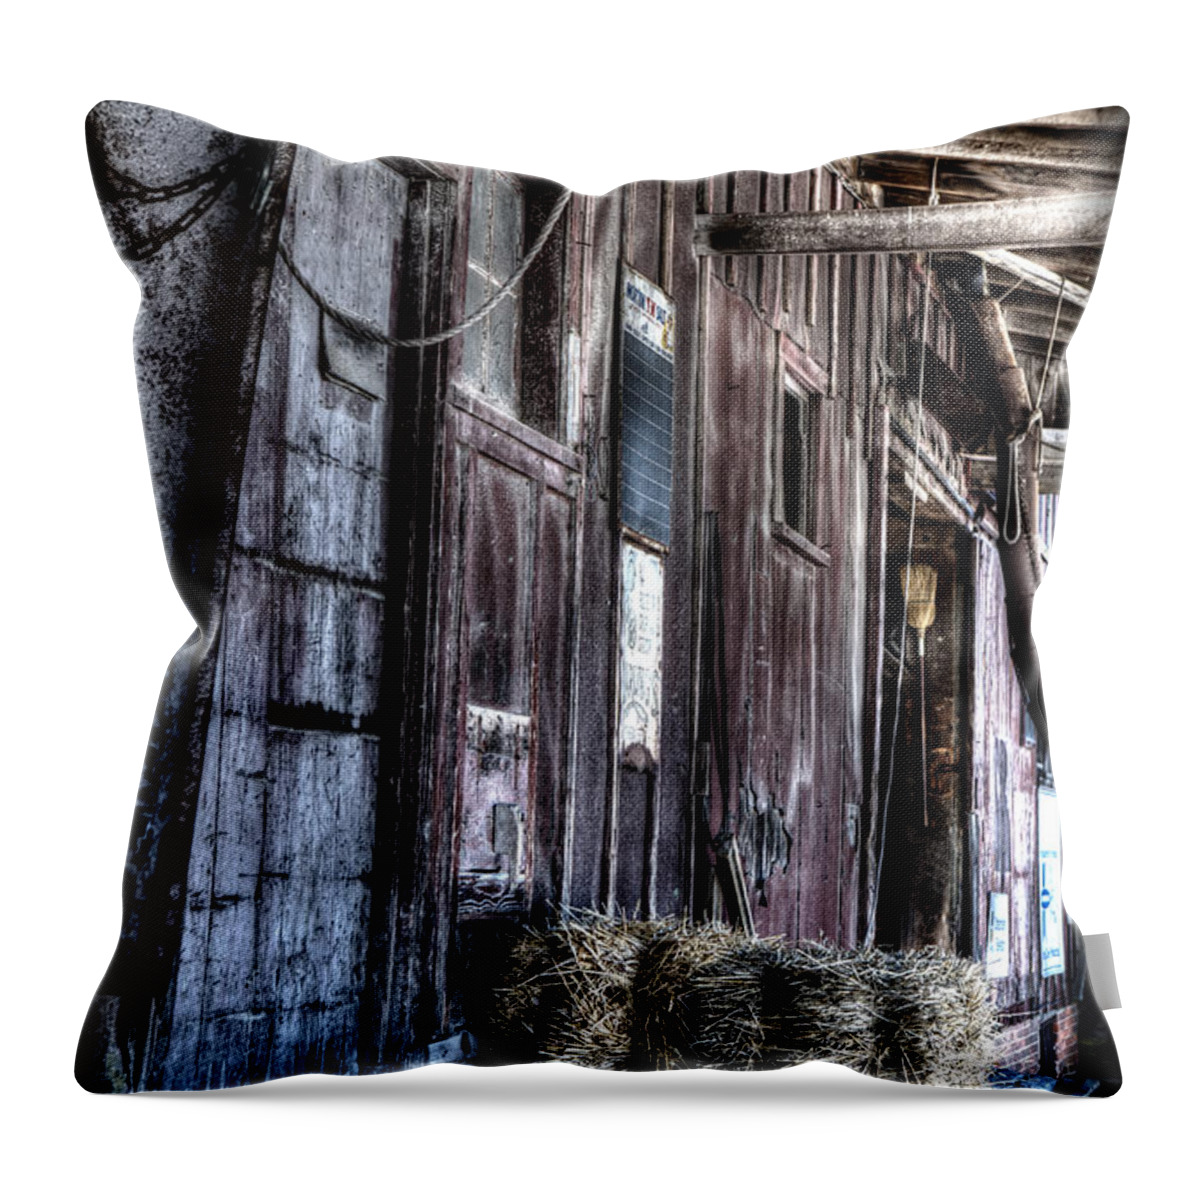 Grant Throw Pillow featuring the photograph Wayne Feed by Evie Carrier